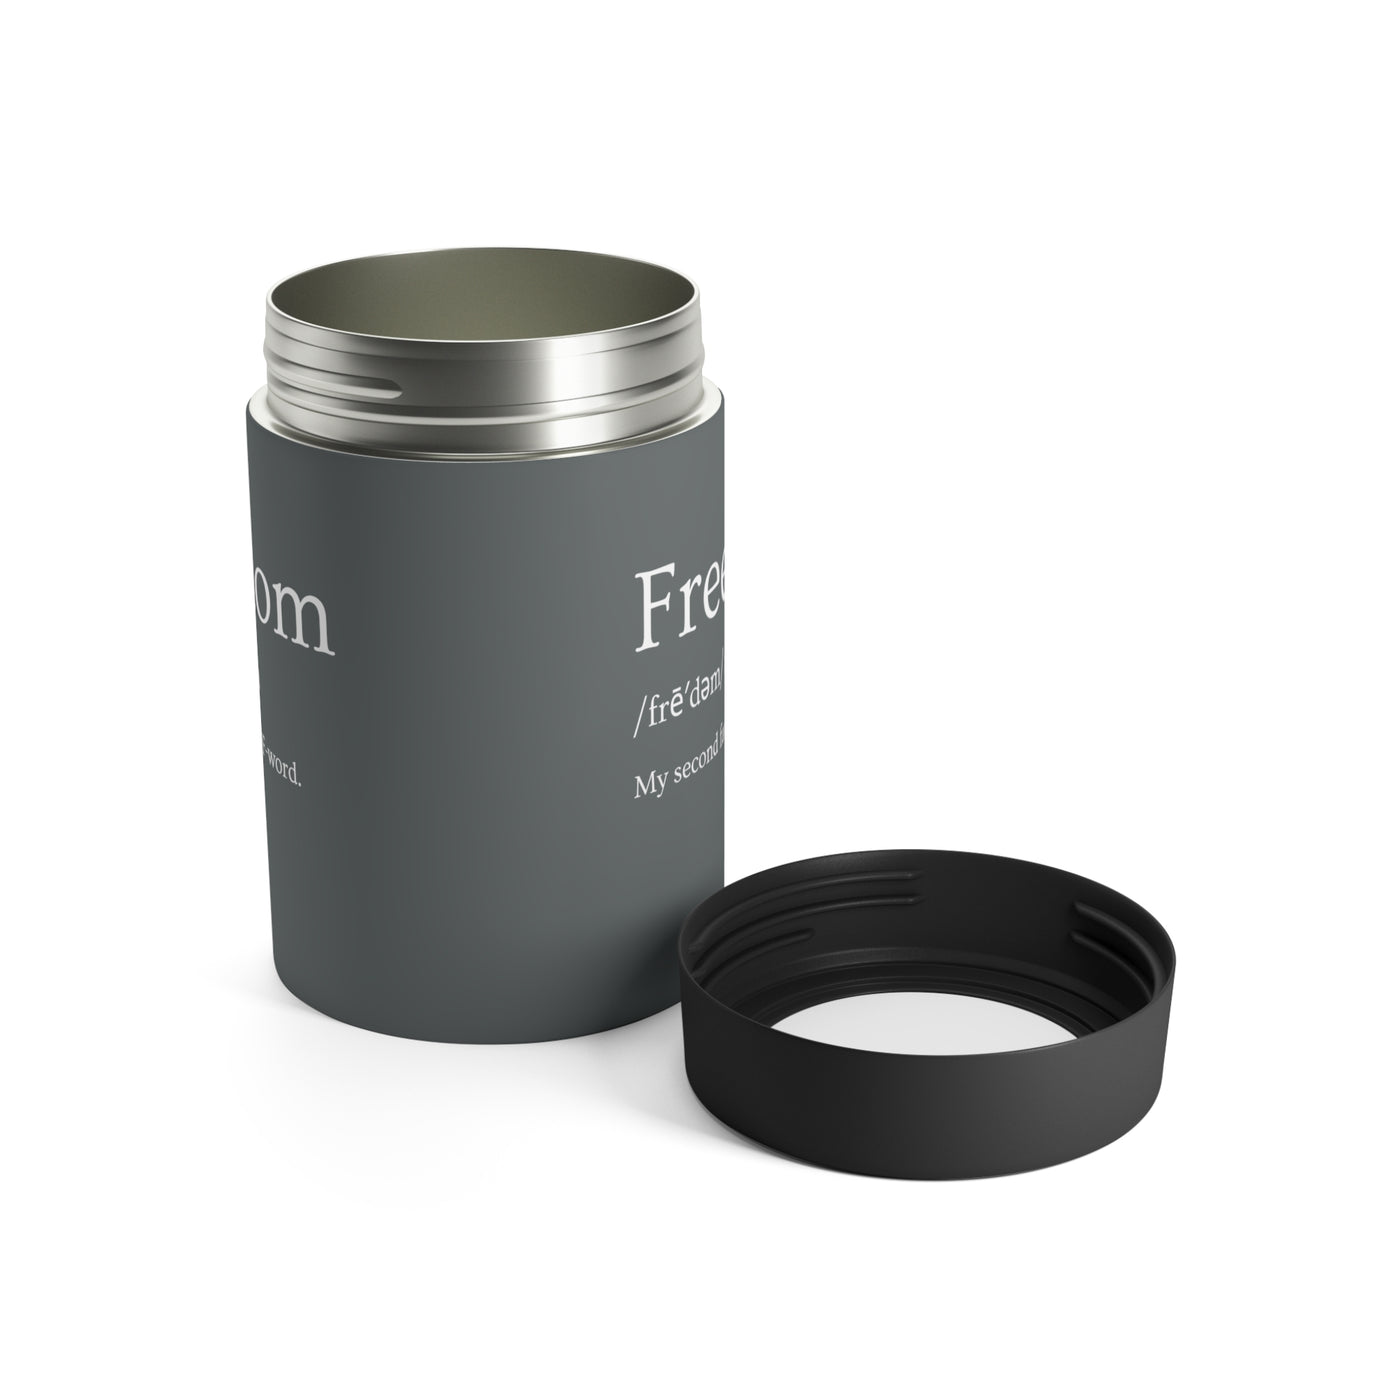 Freedom Defined Stainless Steel Can Holder